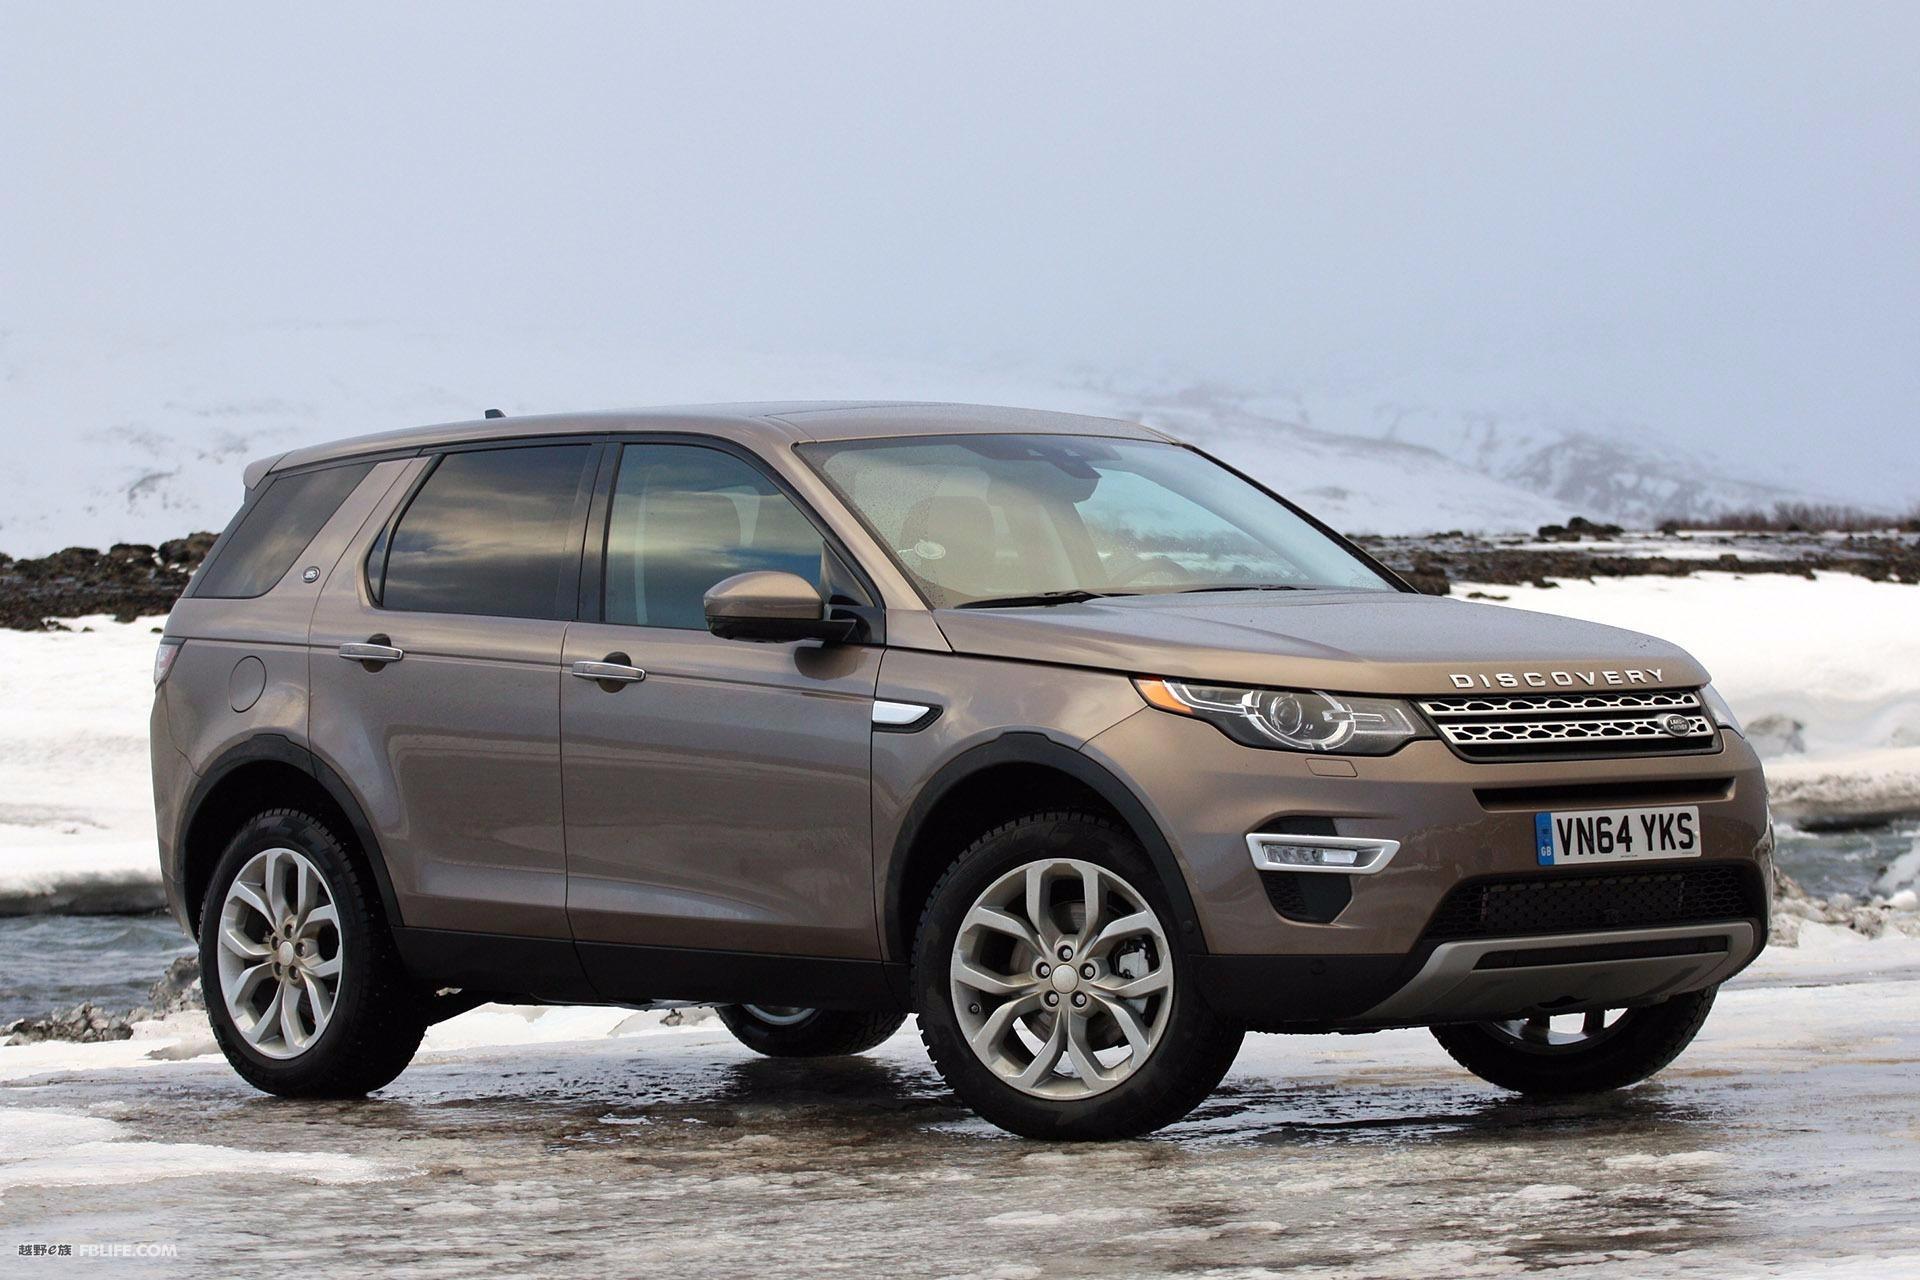 Land rover sport 2015. Land Rover Discovery Sport. Ленд Ровер Дискавери 2015. Land Rover Discovery Sport 2015. Лэнд Ровер Дискавери, 2015.